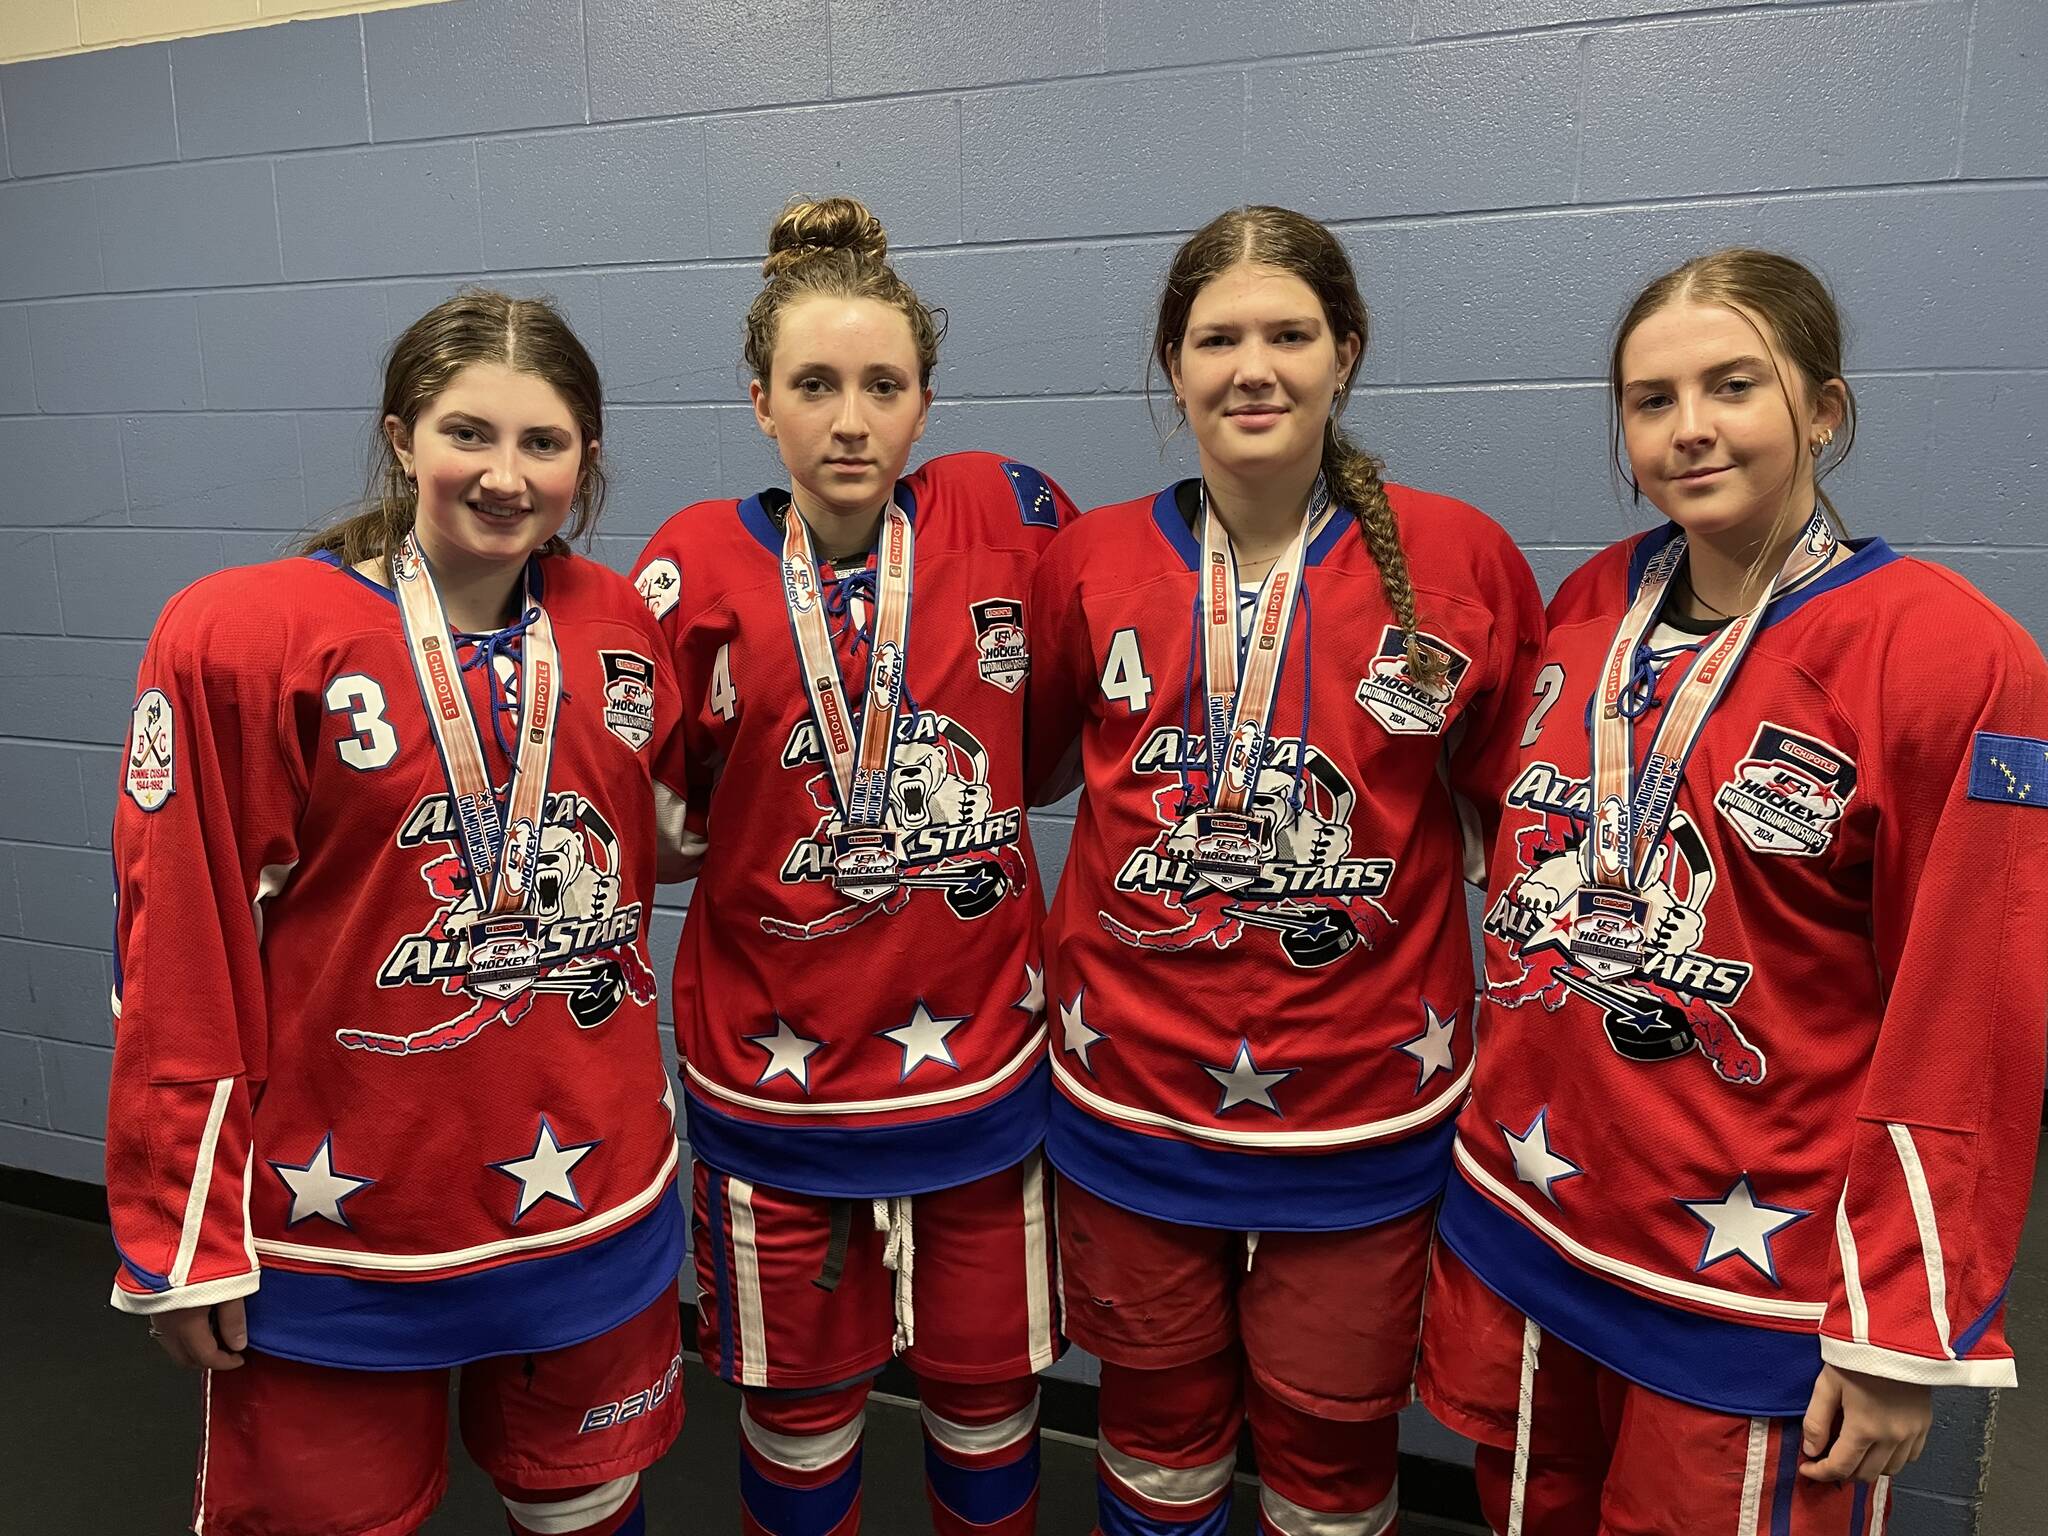 Lily Langham of Kenai Central High School and Brooklyn Larsen, Rylie Thompson and Ava Fabian of Soldotna High School, stand for a photo with their medals after competing in the USA Hockey National Championships as part of the Alaska All Stars 19U Division 2A hockey team. (photo provided)